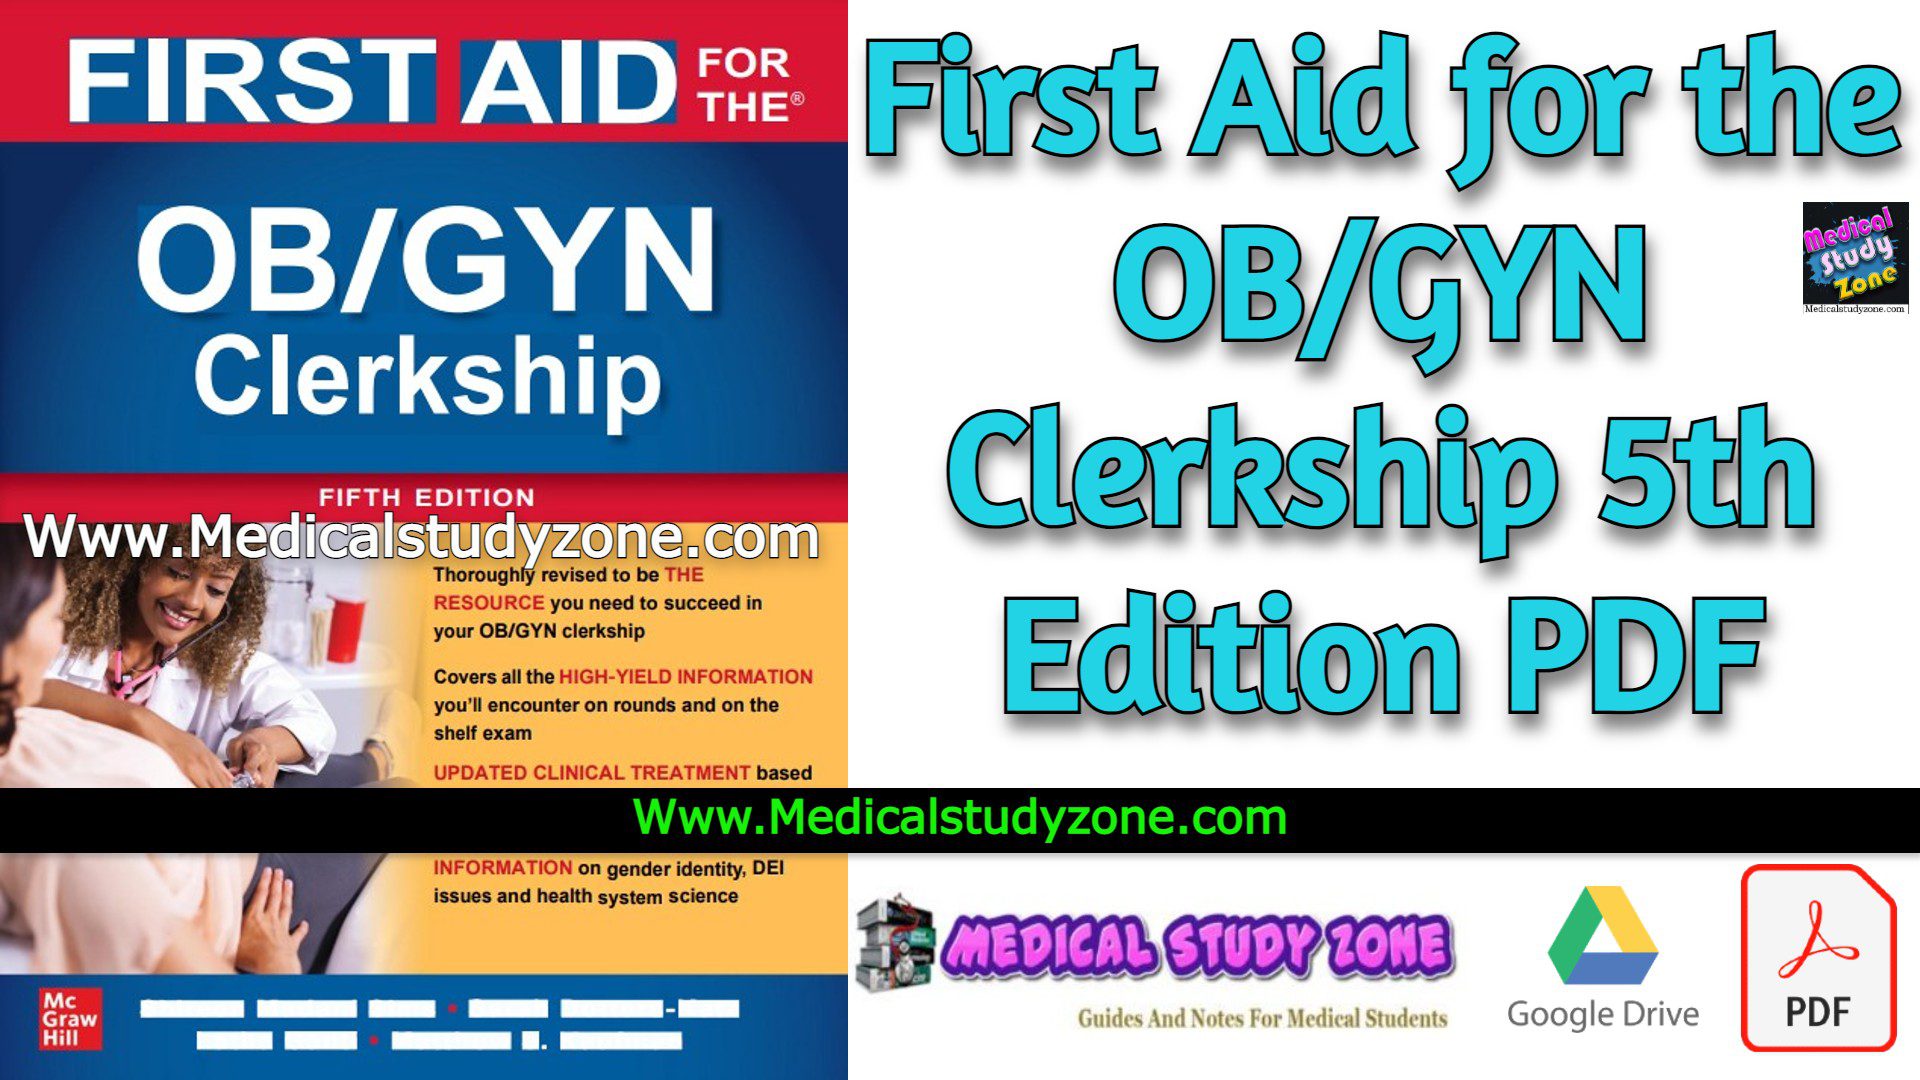 First Aid for the OB/GYN Clerkship 5th Edition PDF Free Download [Direct Link]